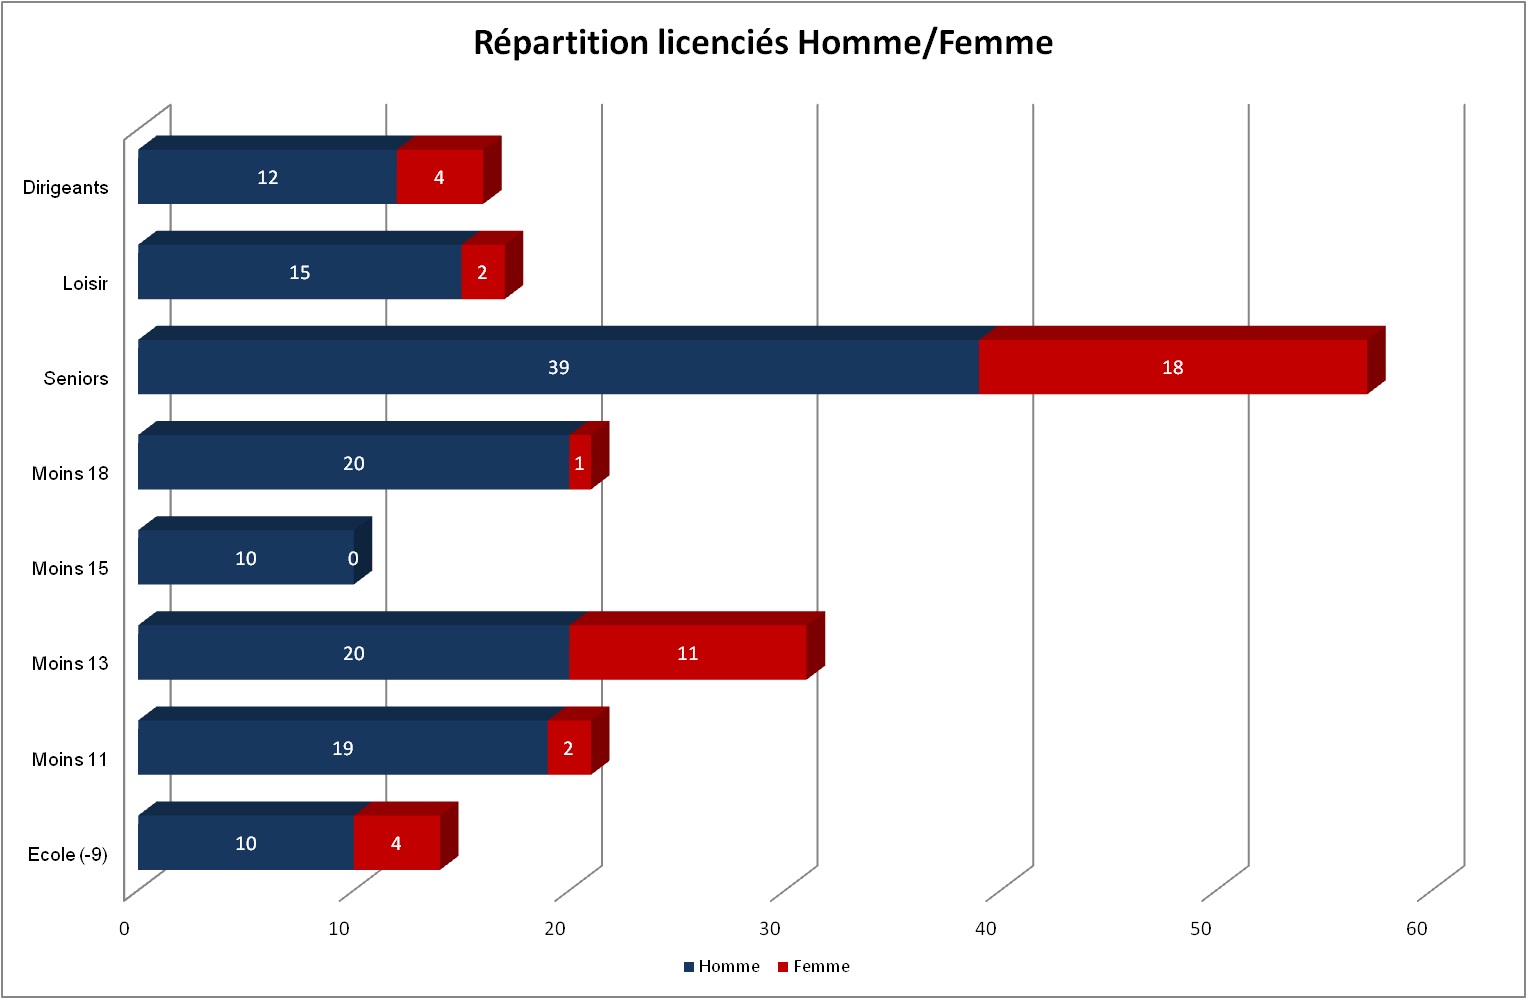 Repartition groupe sexe